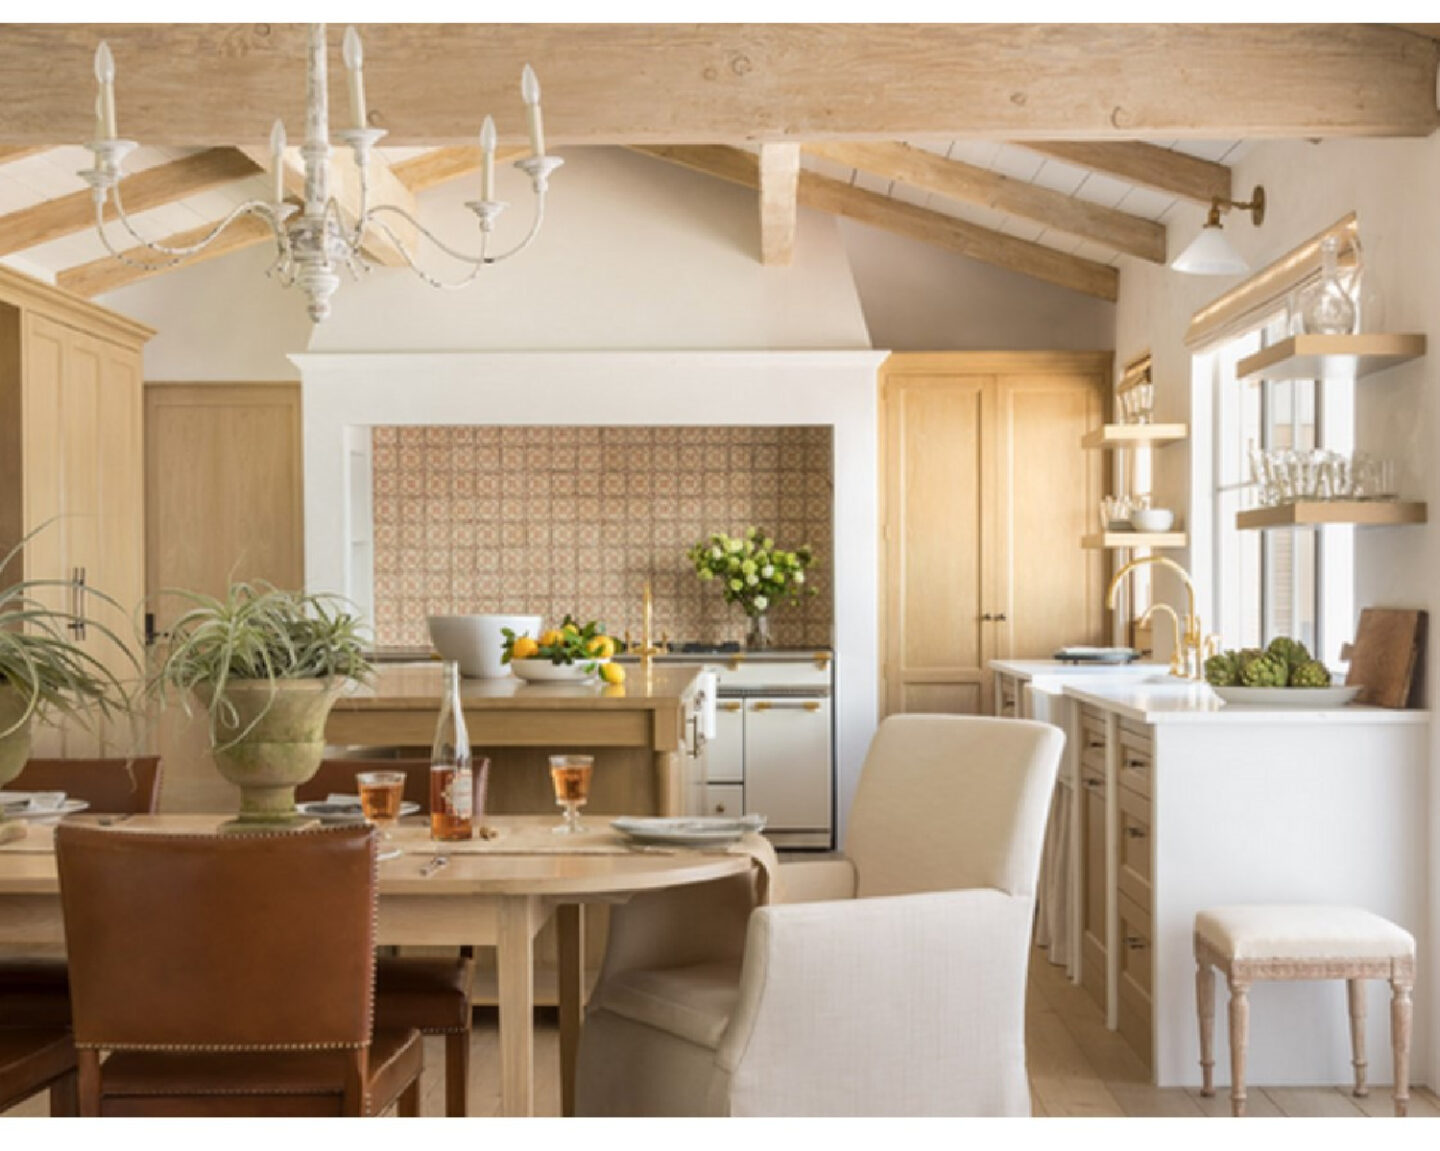 Brooke Giannetti & Steve Giannetti designed kitchen with California chic and European country rustic elegance. #frenchfarmhouse #giannettihome